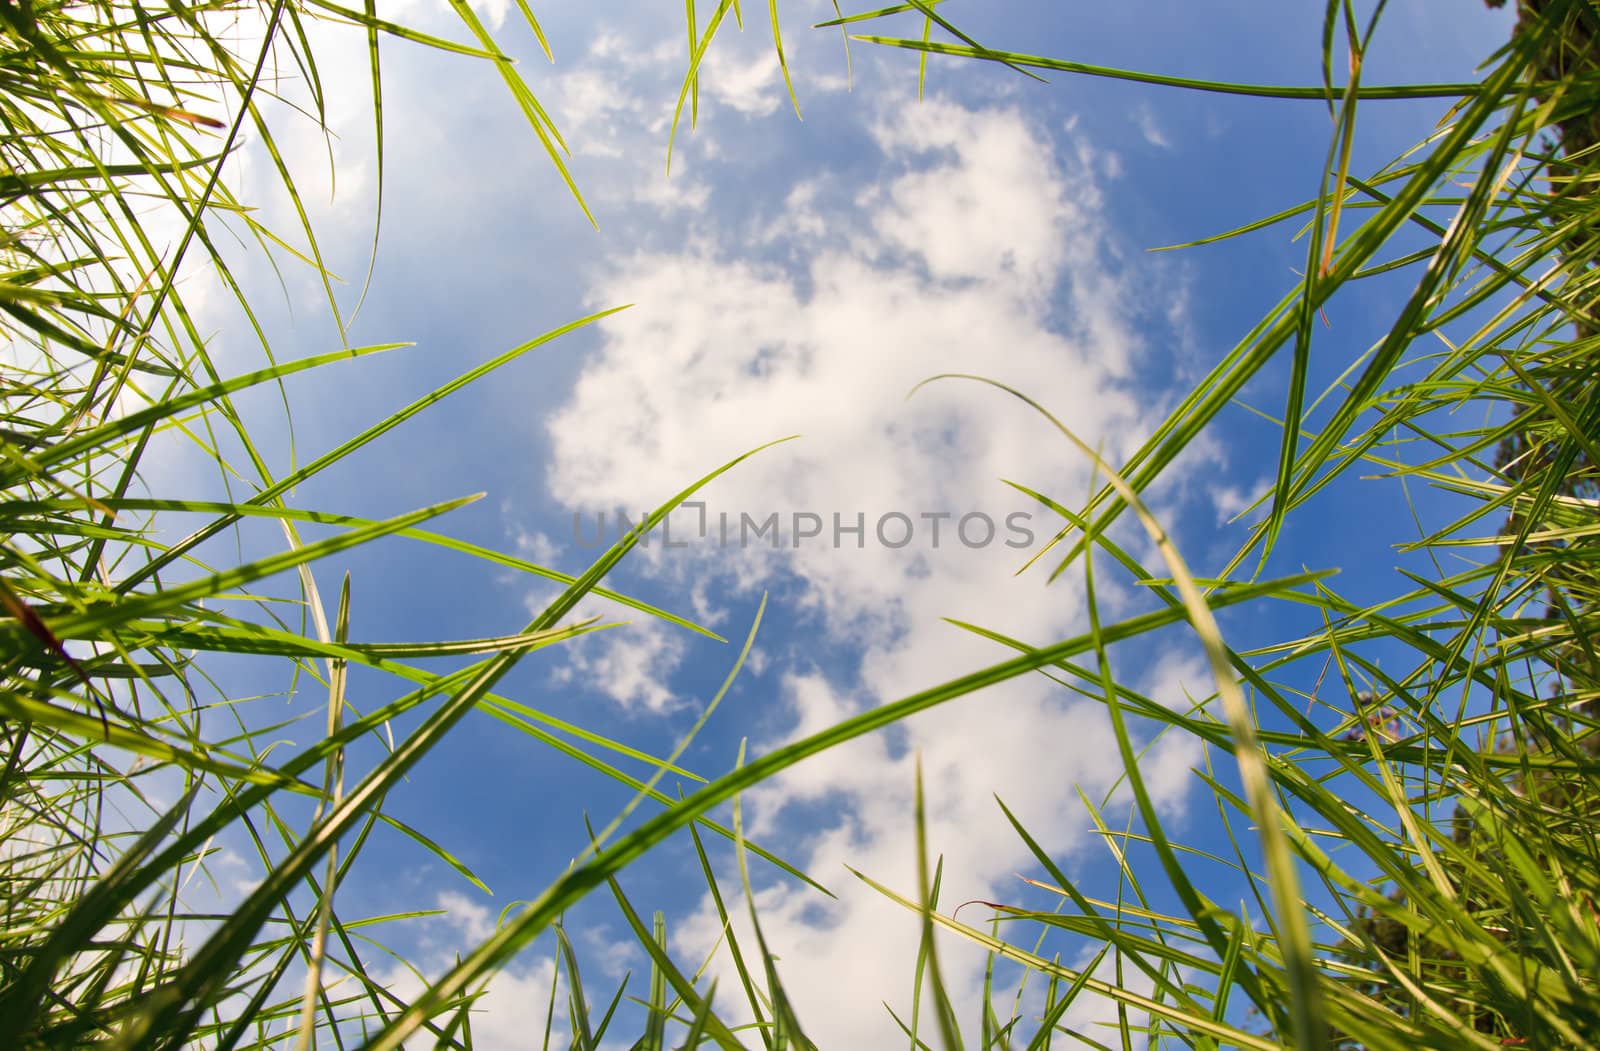 Ant eye view with fisheye lens Nature background frame by Suriyaphoto